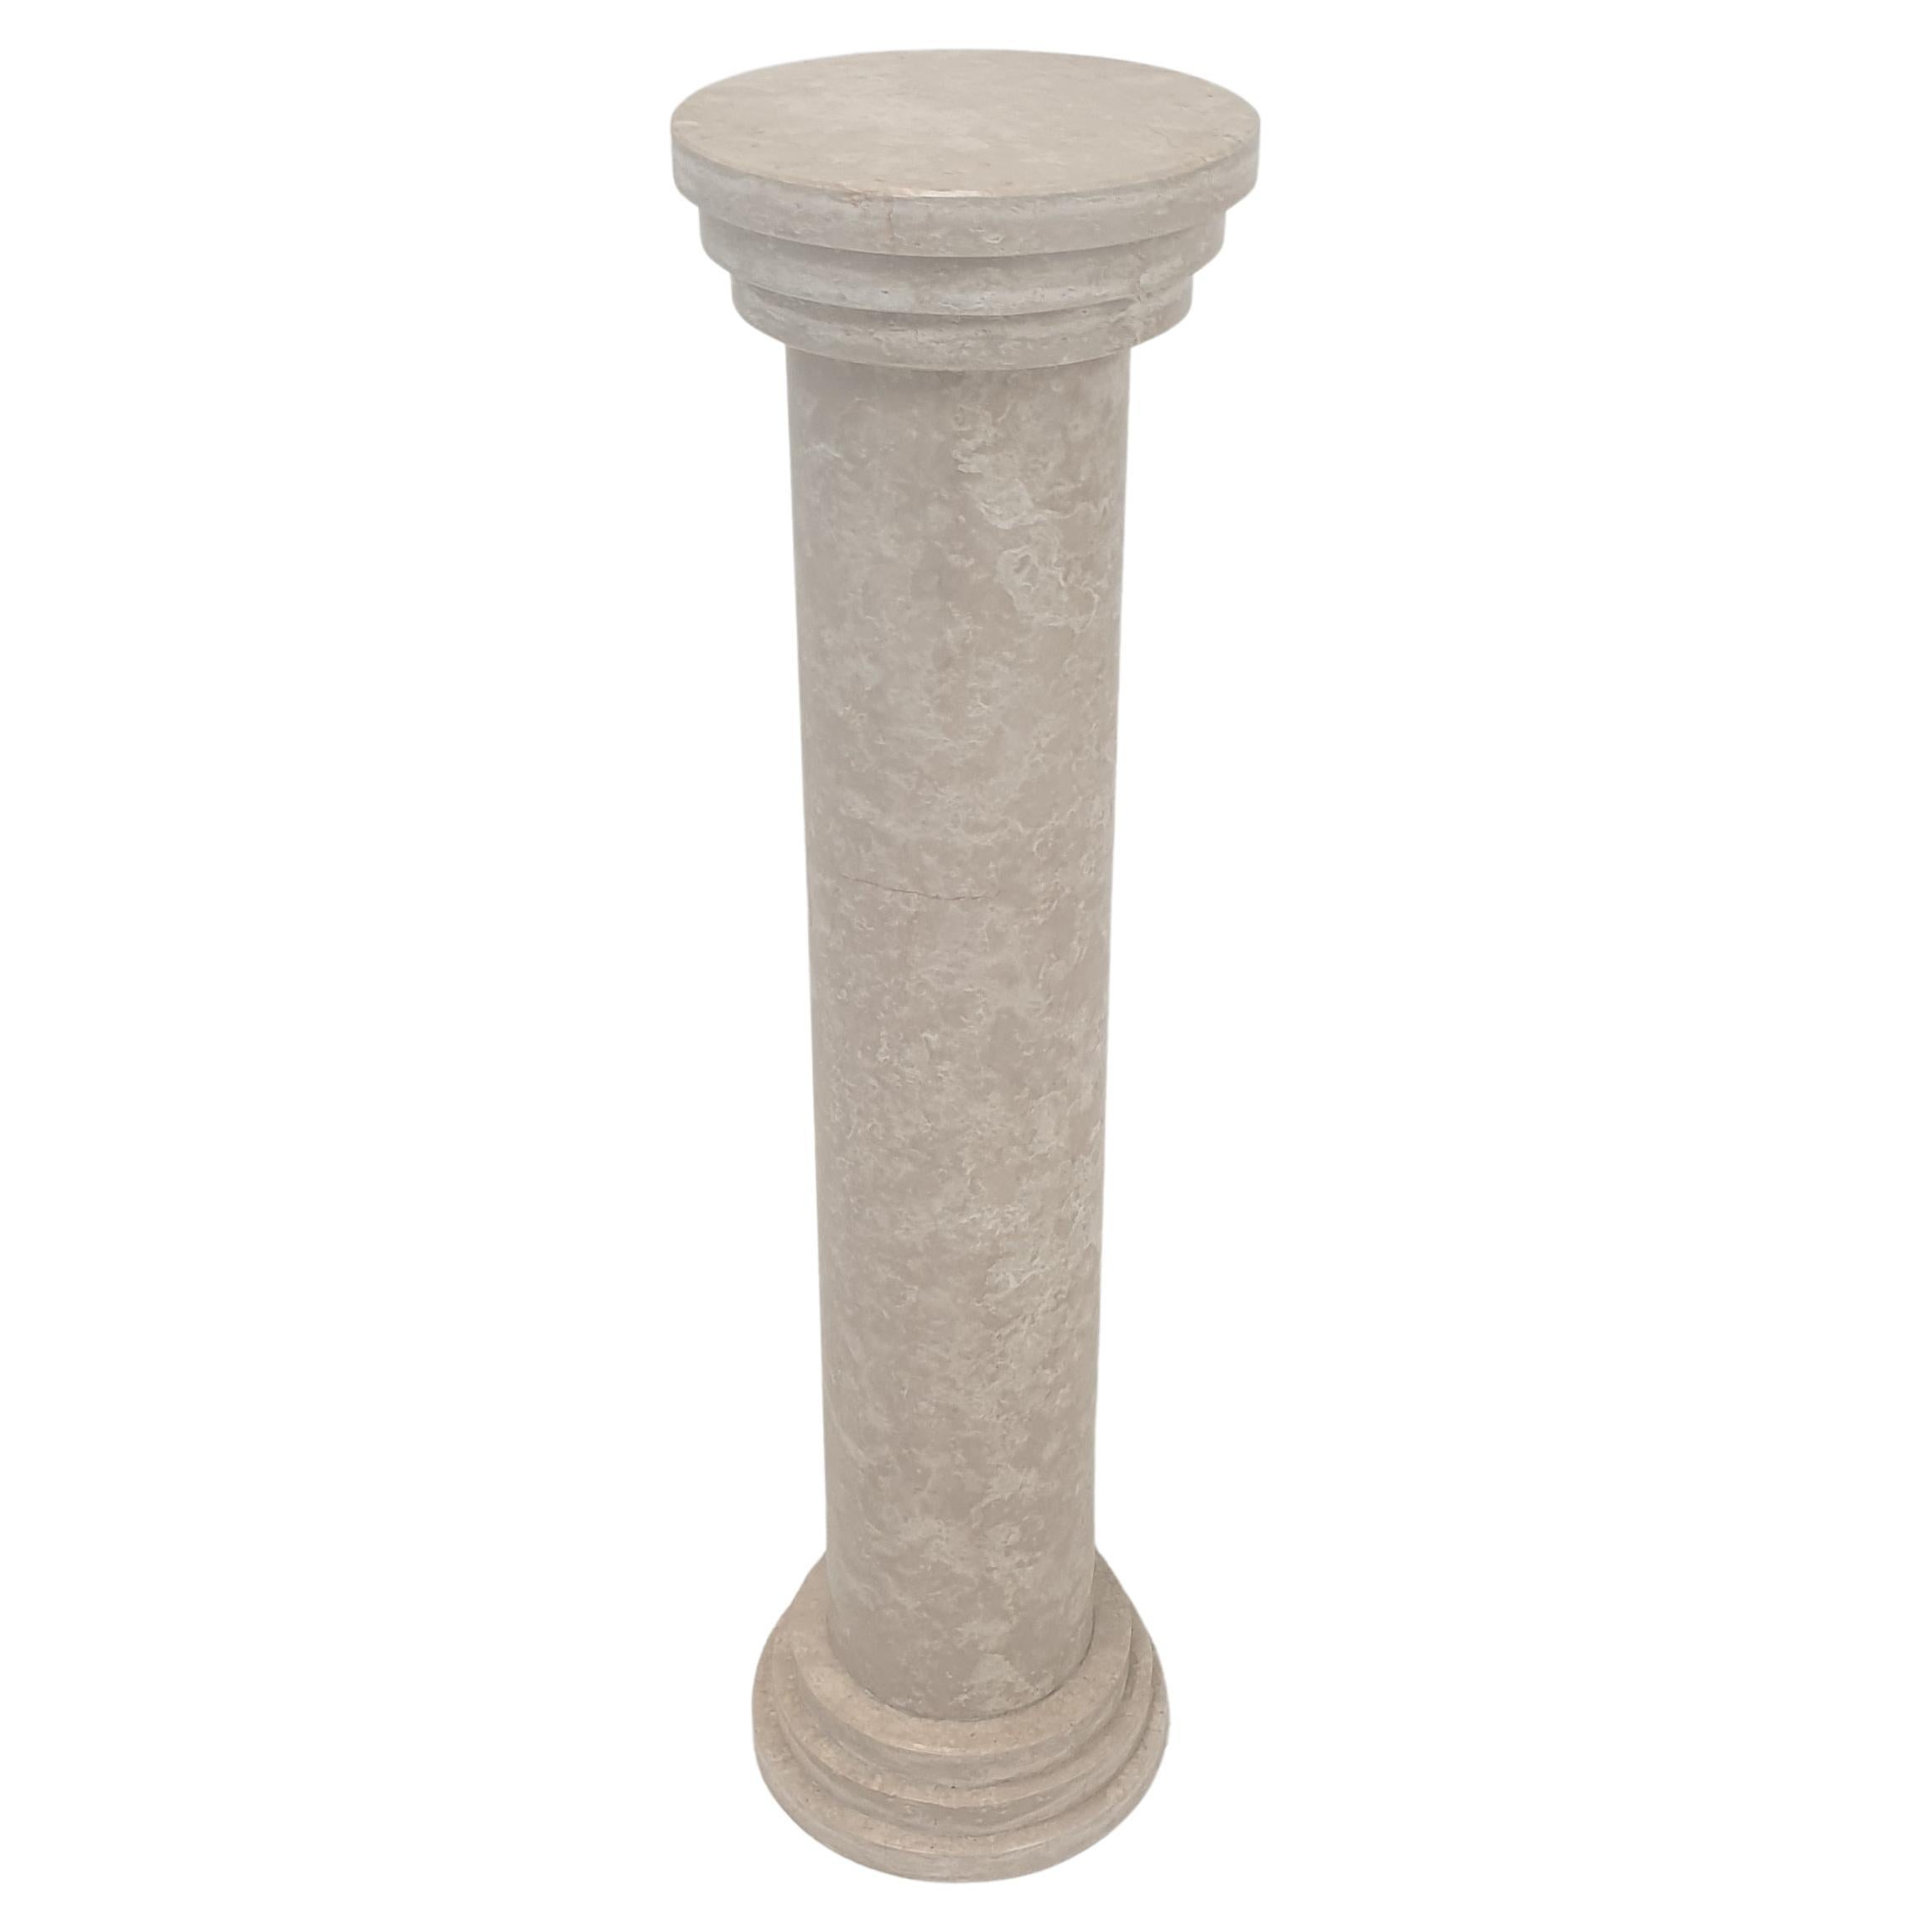 Italian Travertine Side Table or Pedestal, 1980s For Sale